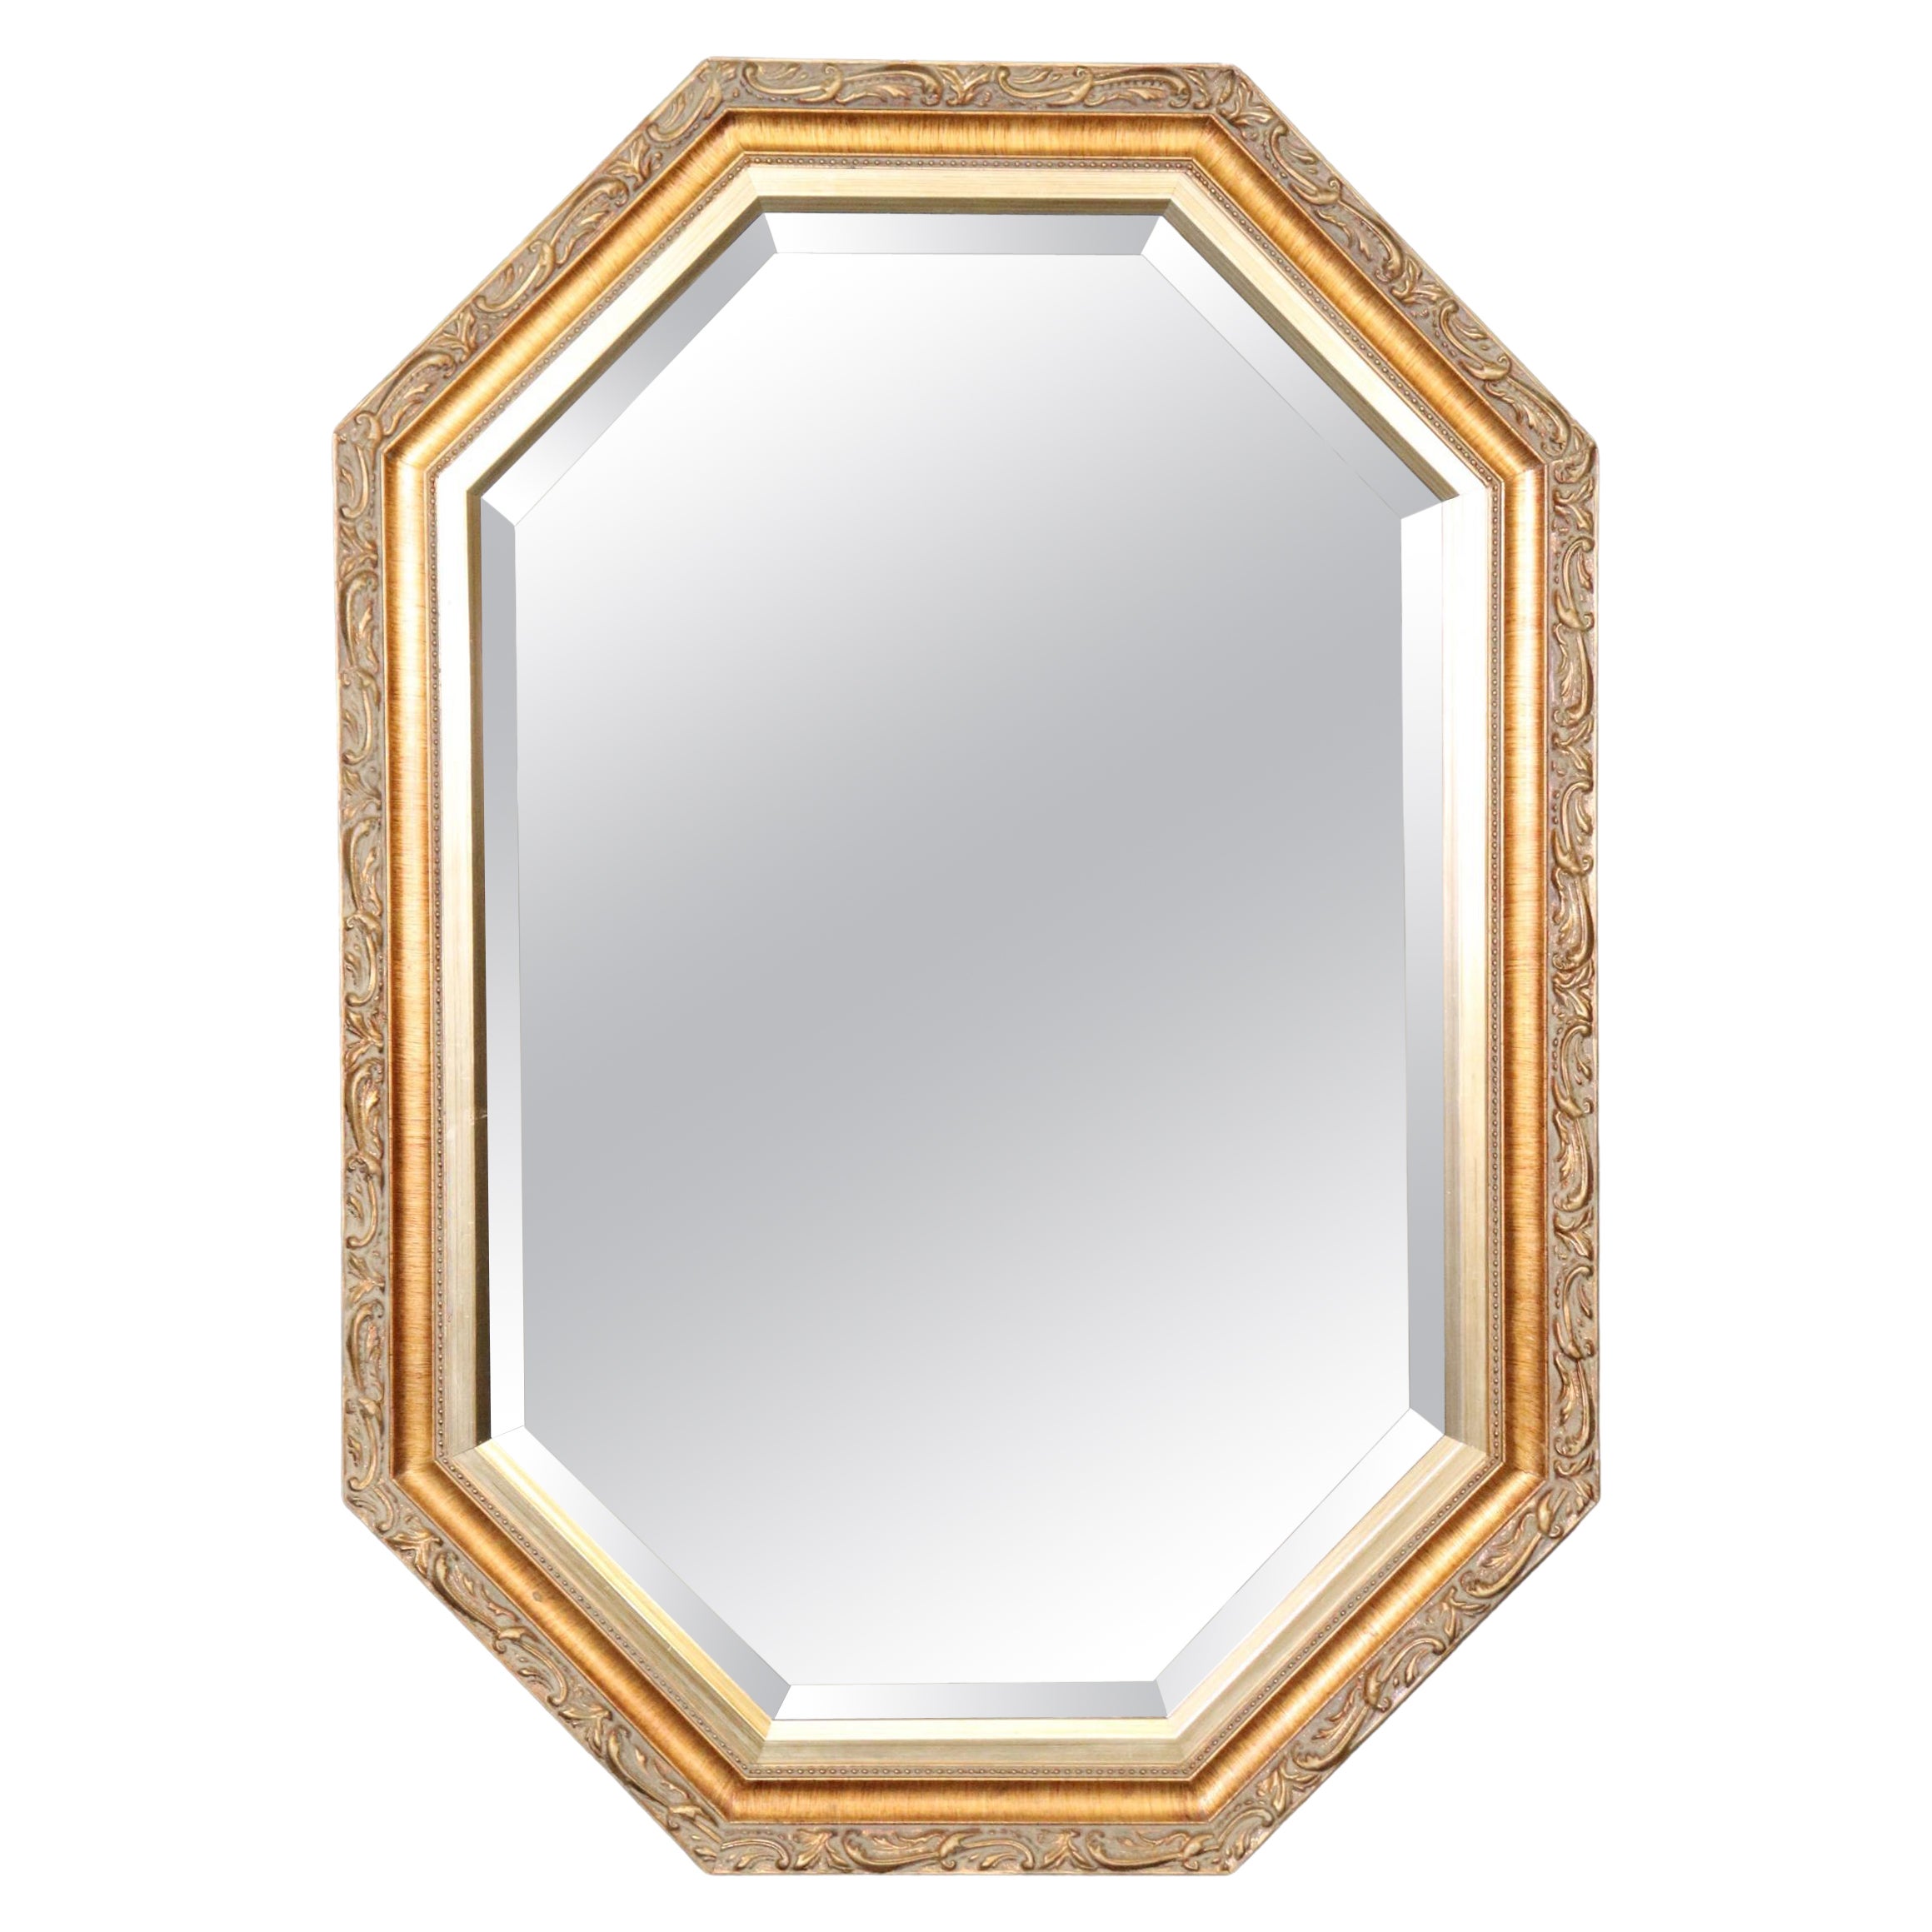 French Louis XVI Style Gold Gilt Octagonal Beveled Glass Wall Hanging Mirror For Sale